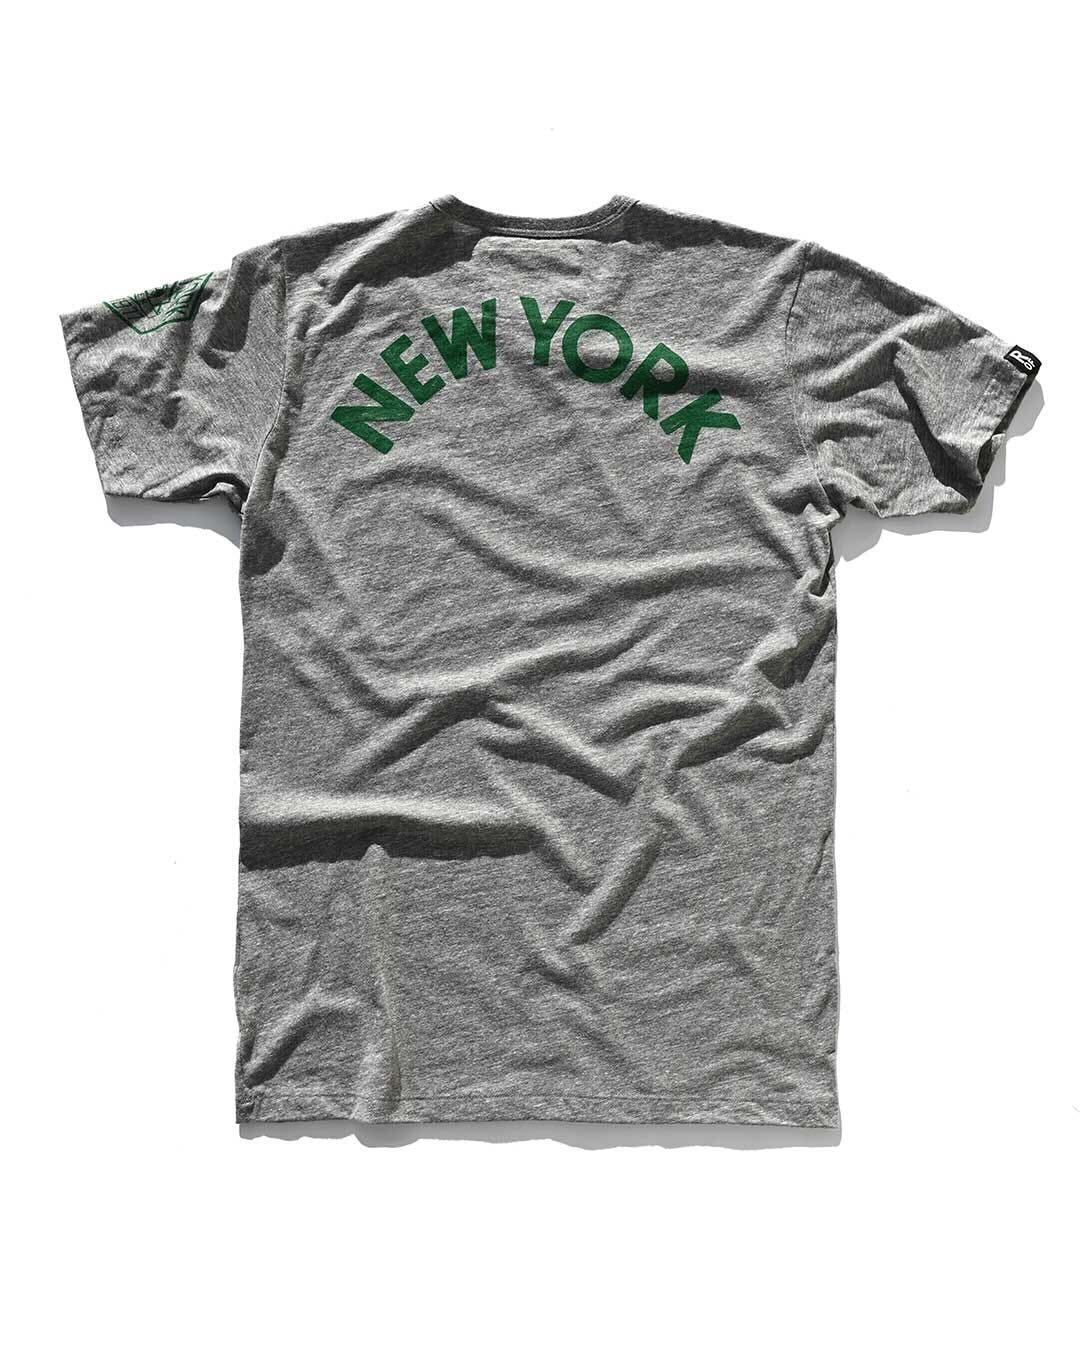 Pelé NYC Champ 1977 Grey Tee - Roots of Fight